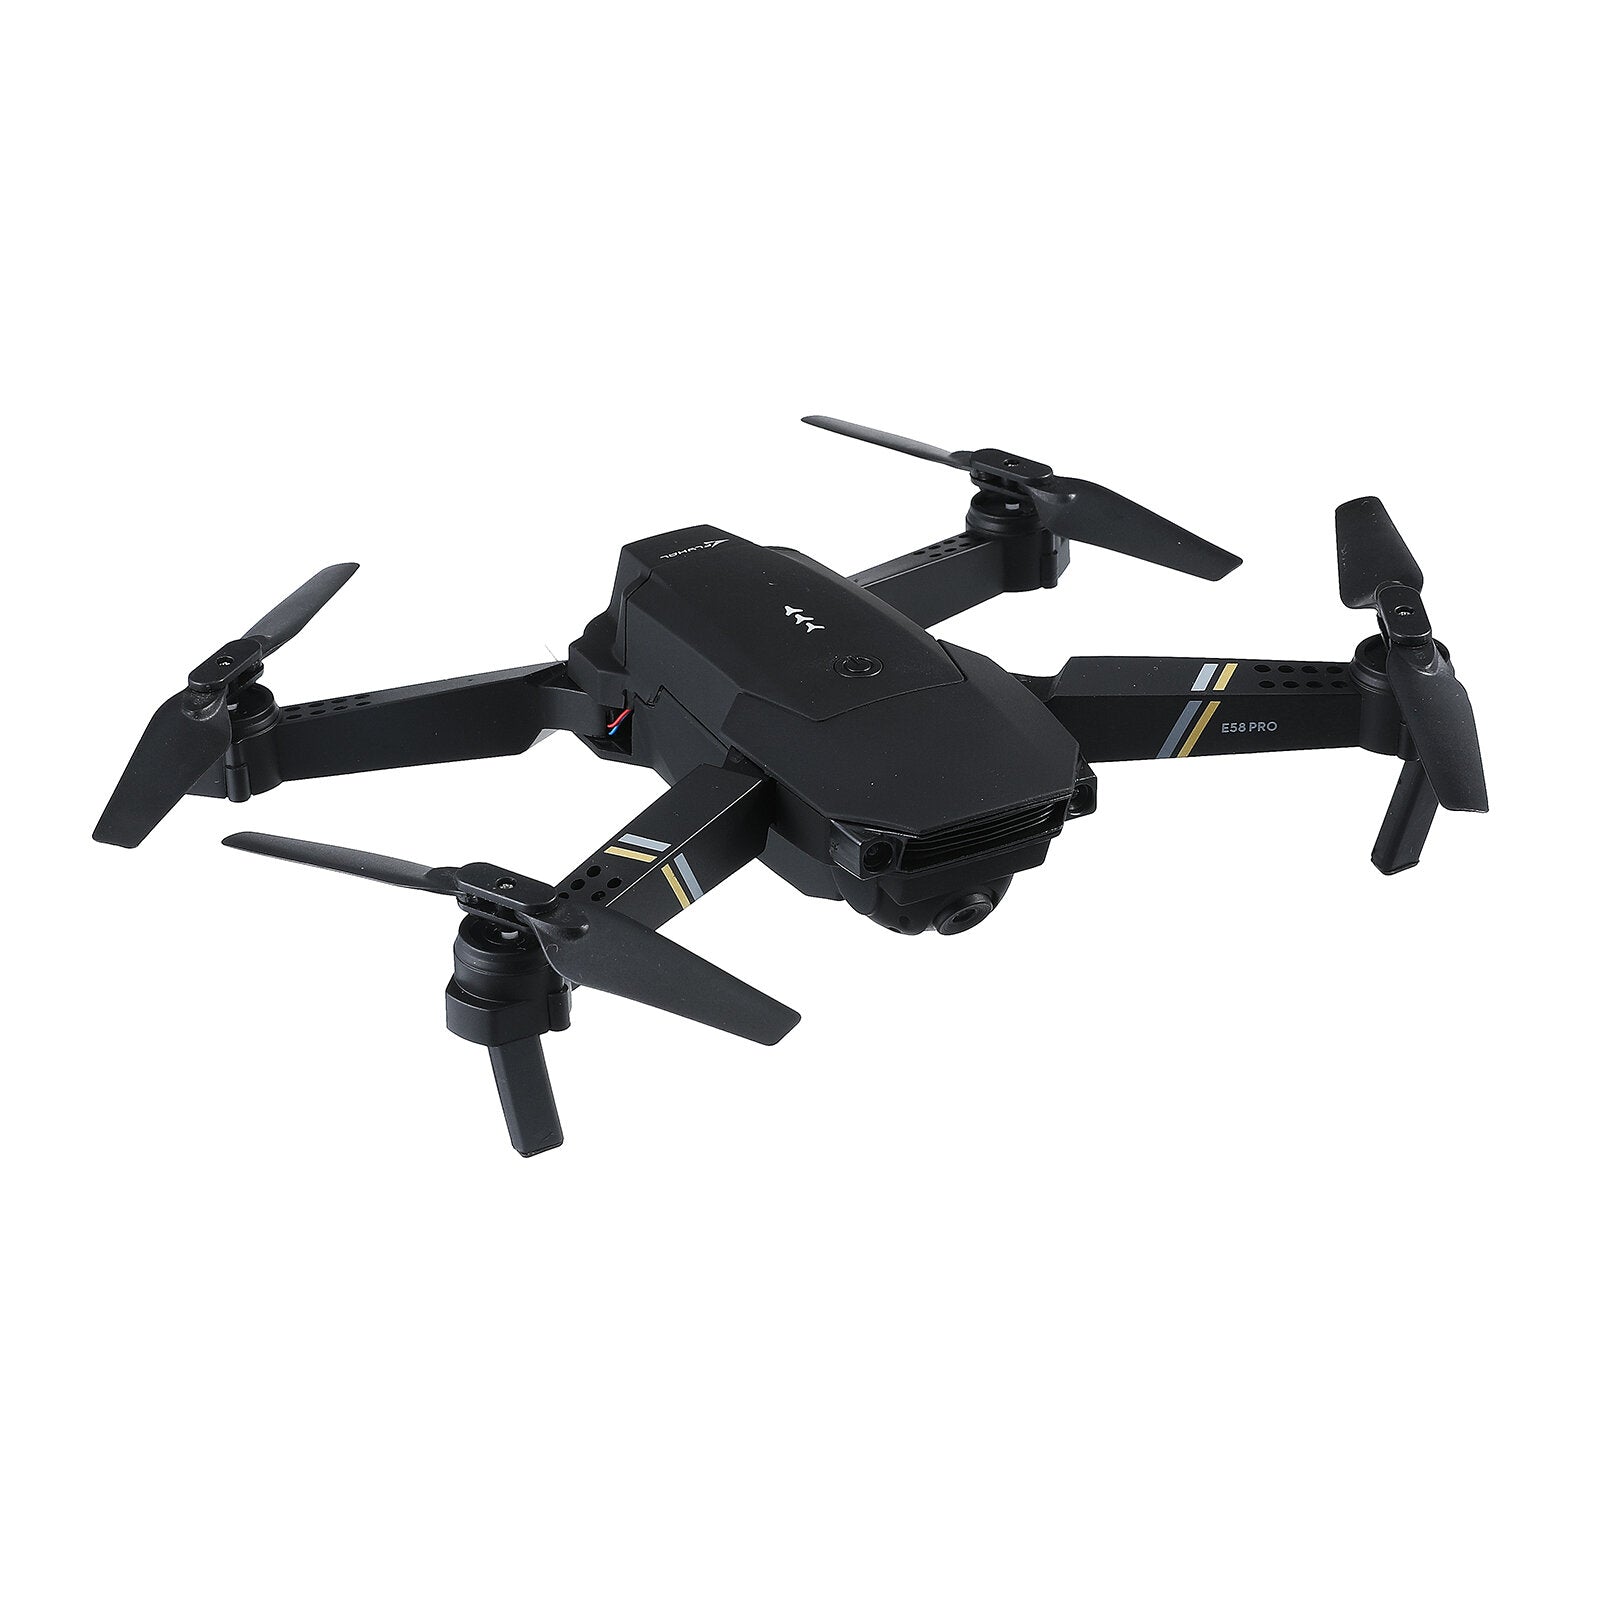 WIFI FPV With 120 FOV 1080P HD Camera Adjustment Angle High Hold Mode Foldable RC Drone Quadcopter RTF